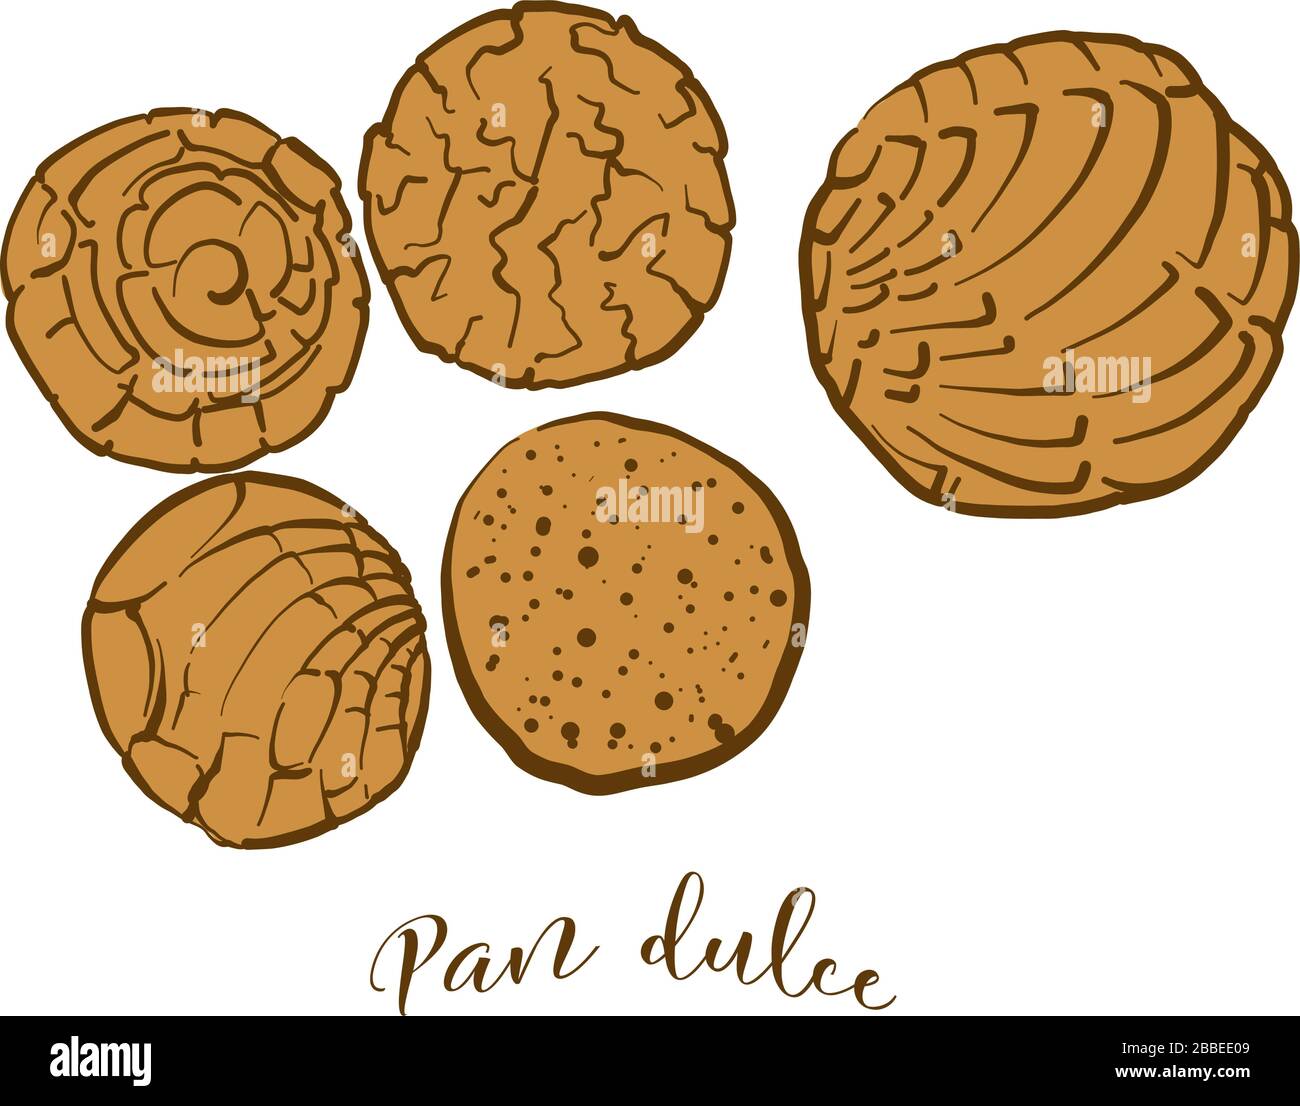 Colored drawing of Pan dulce bread. Vector illustration of Sweet bread food, usually known in Mexico. Colored Bread sketches. Stock Vector